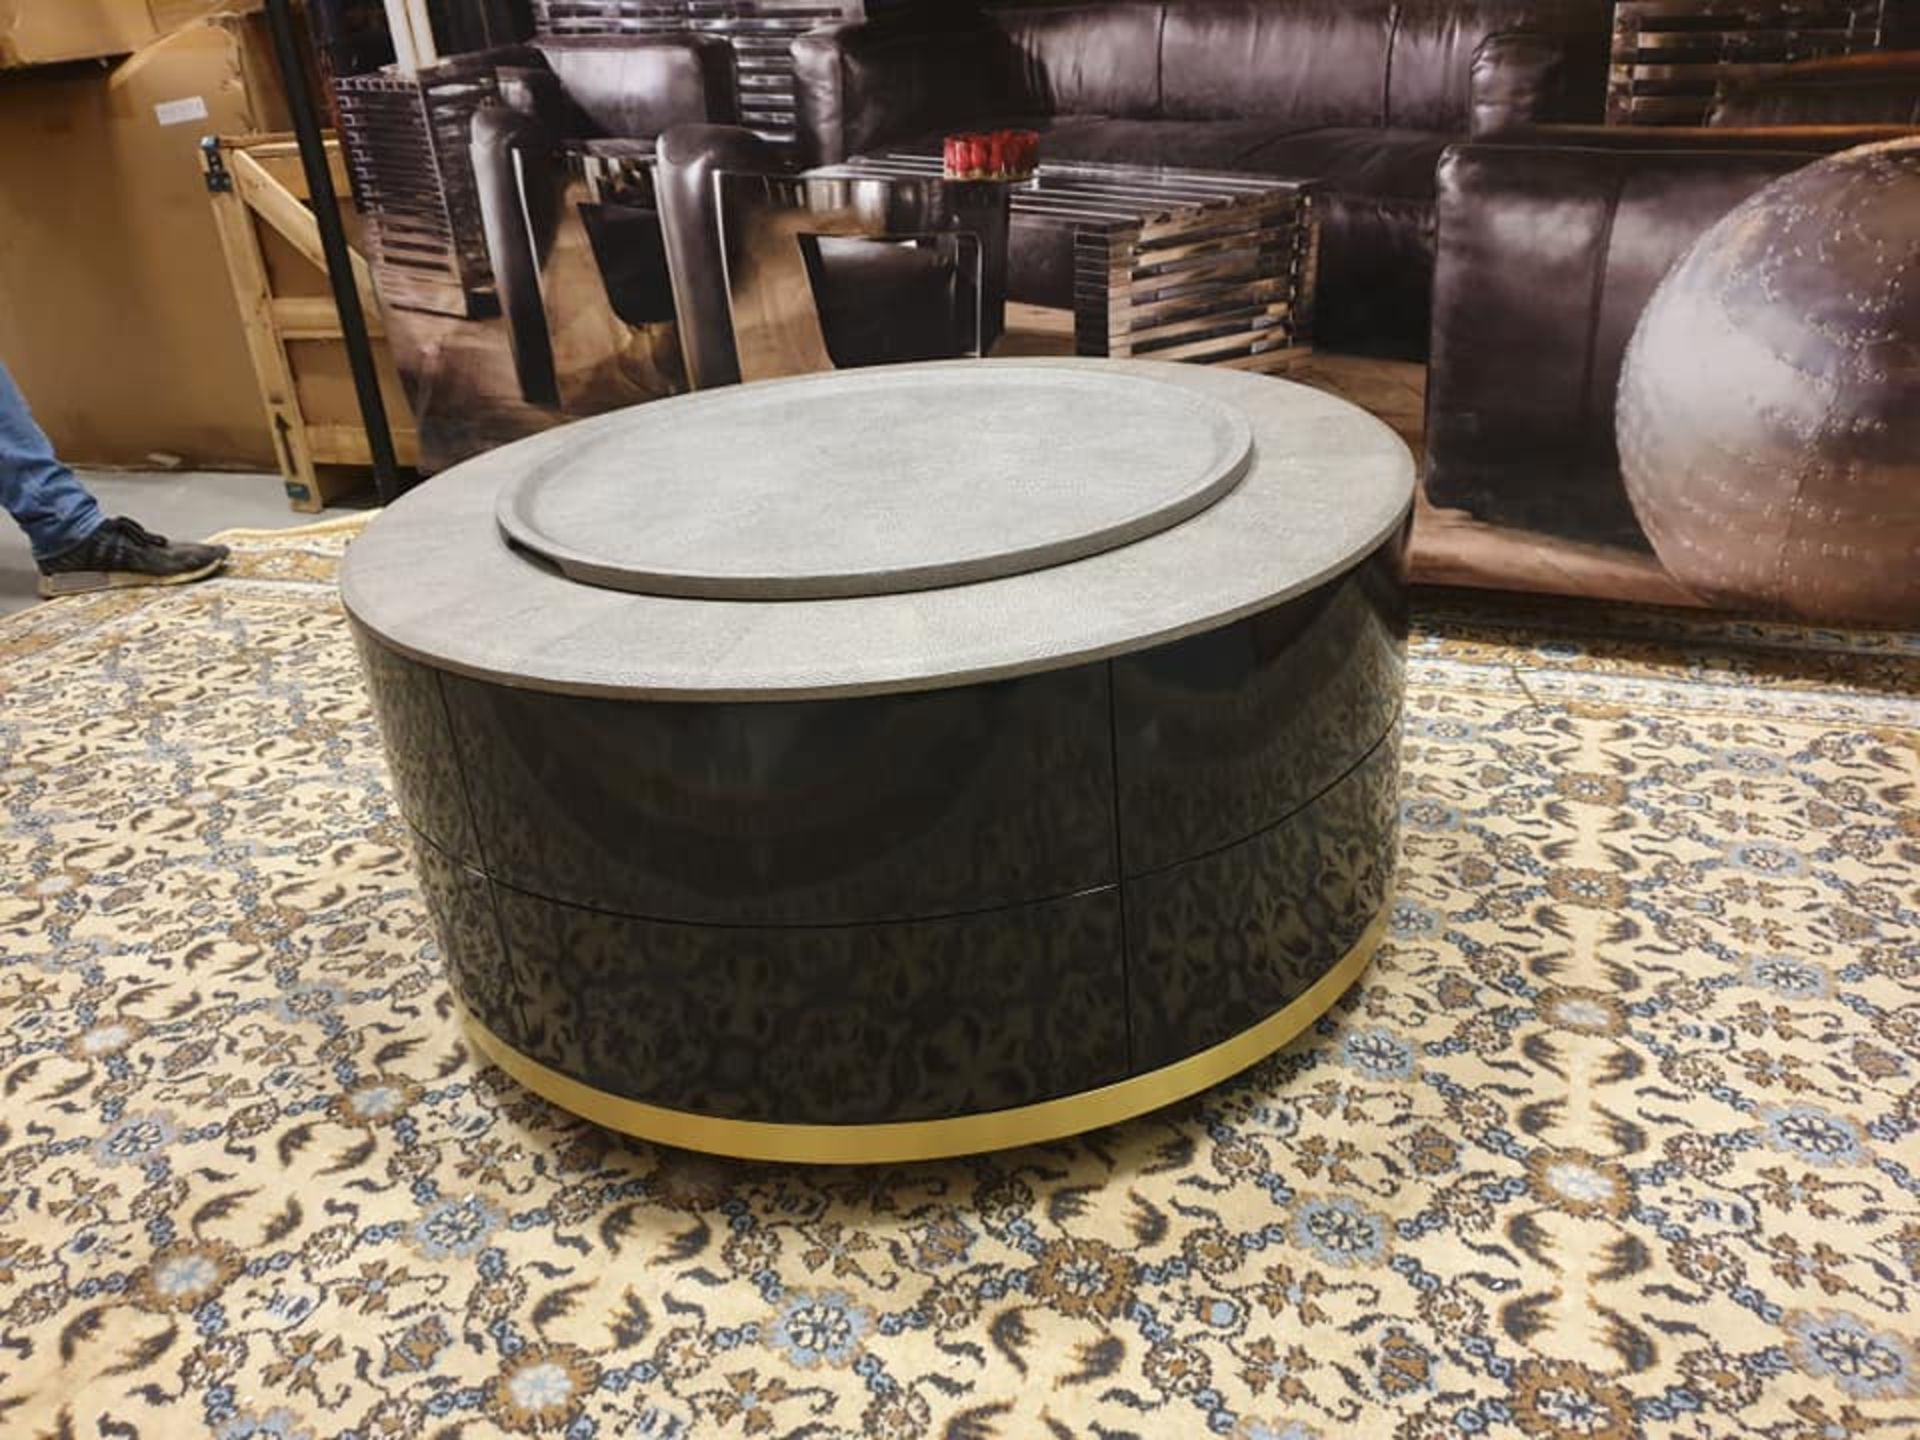 Ashkelly Drum Coffee Table Grey Shagreen Wrapped With Gloss Panel Detailing Brass Banding And - Image 2 of 2